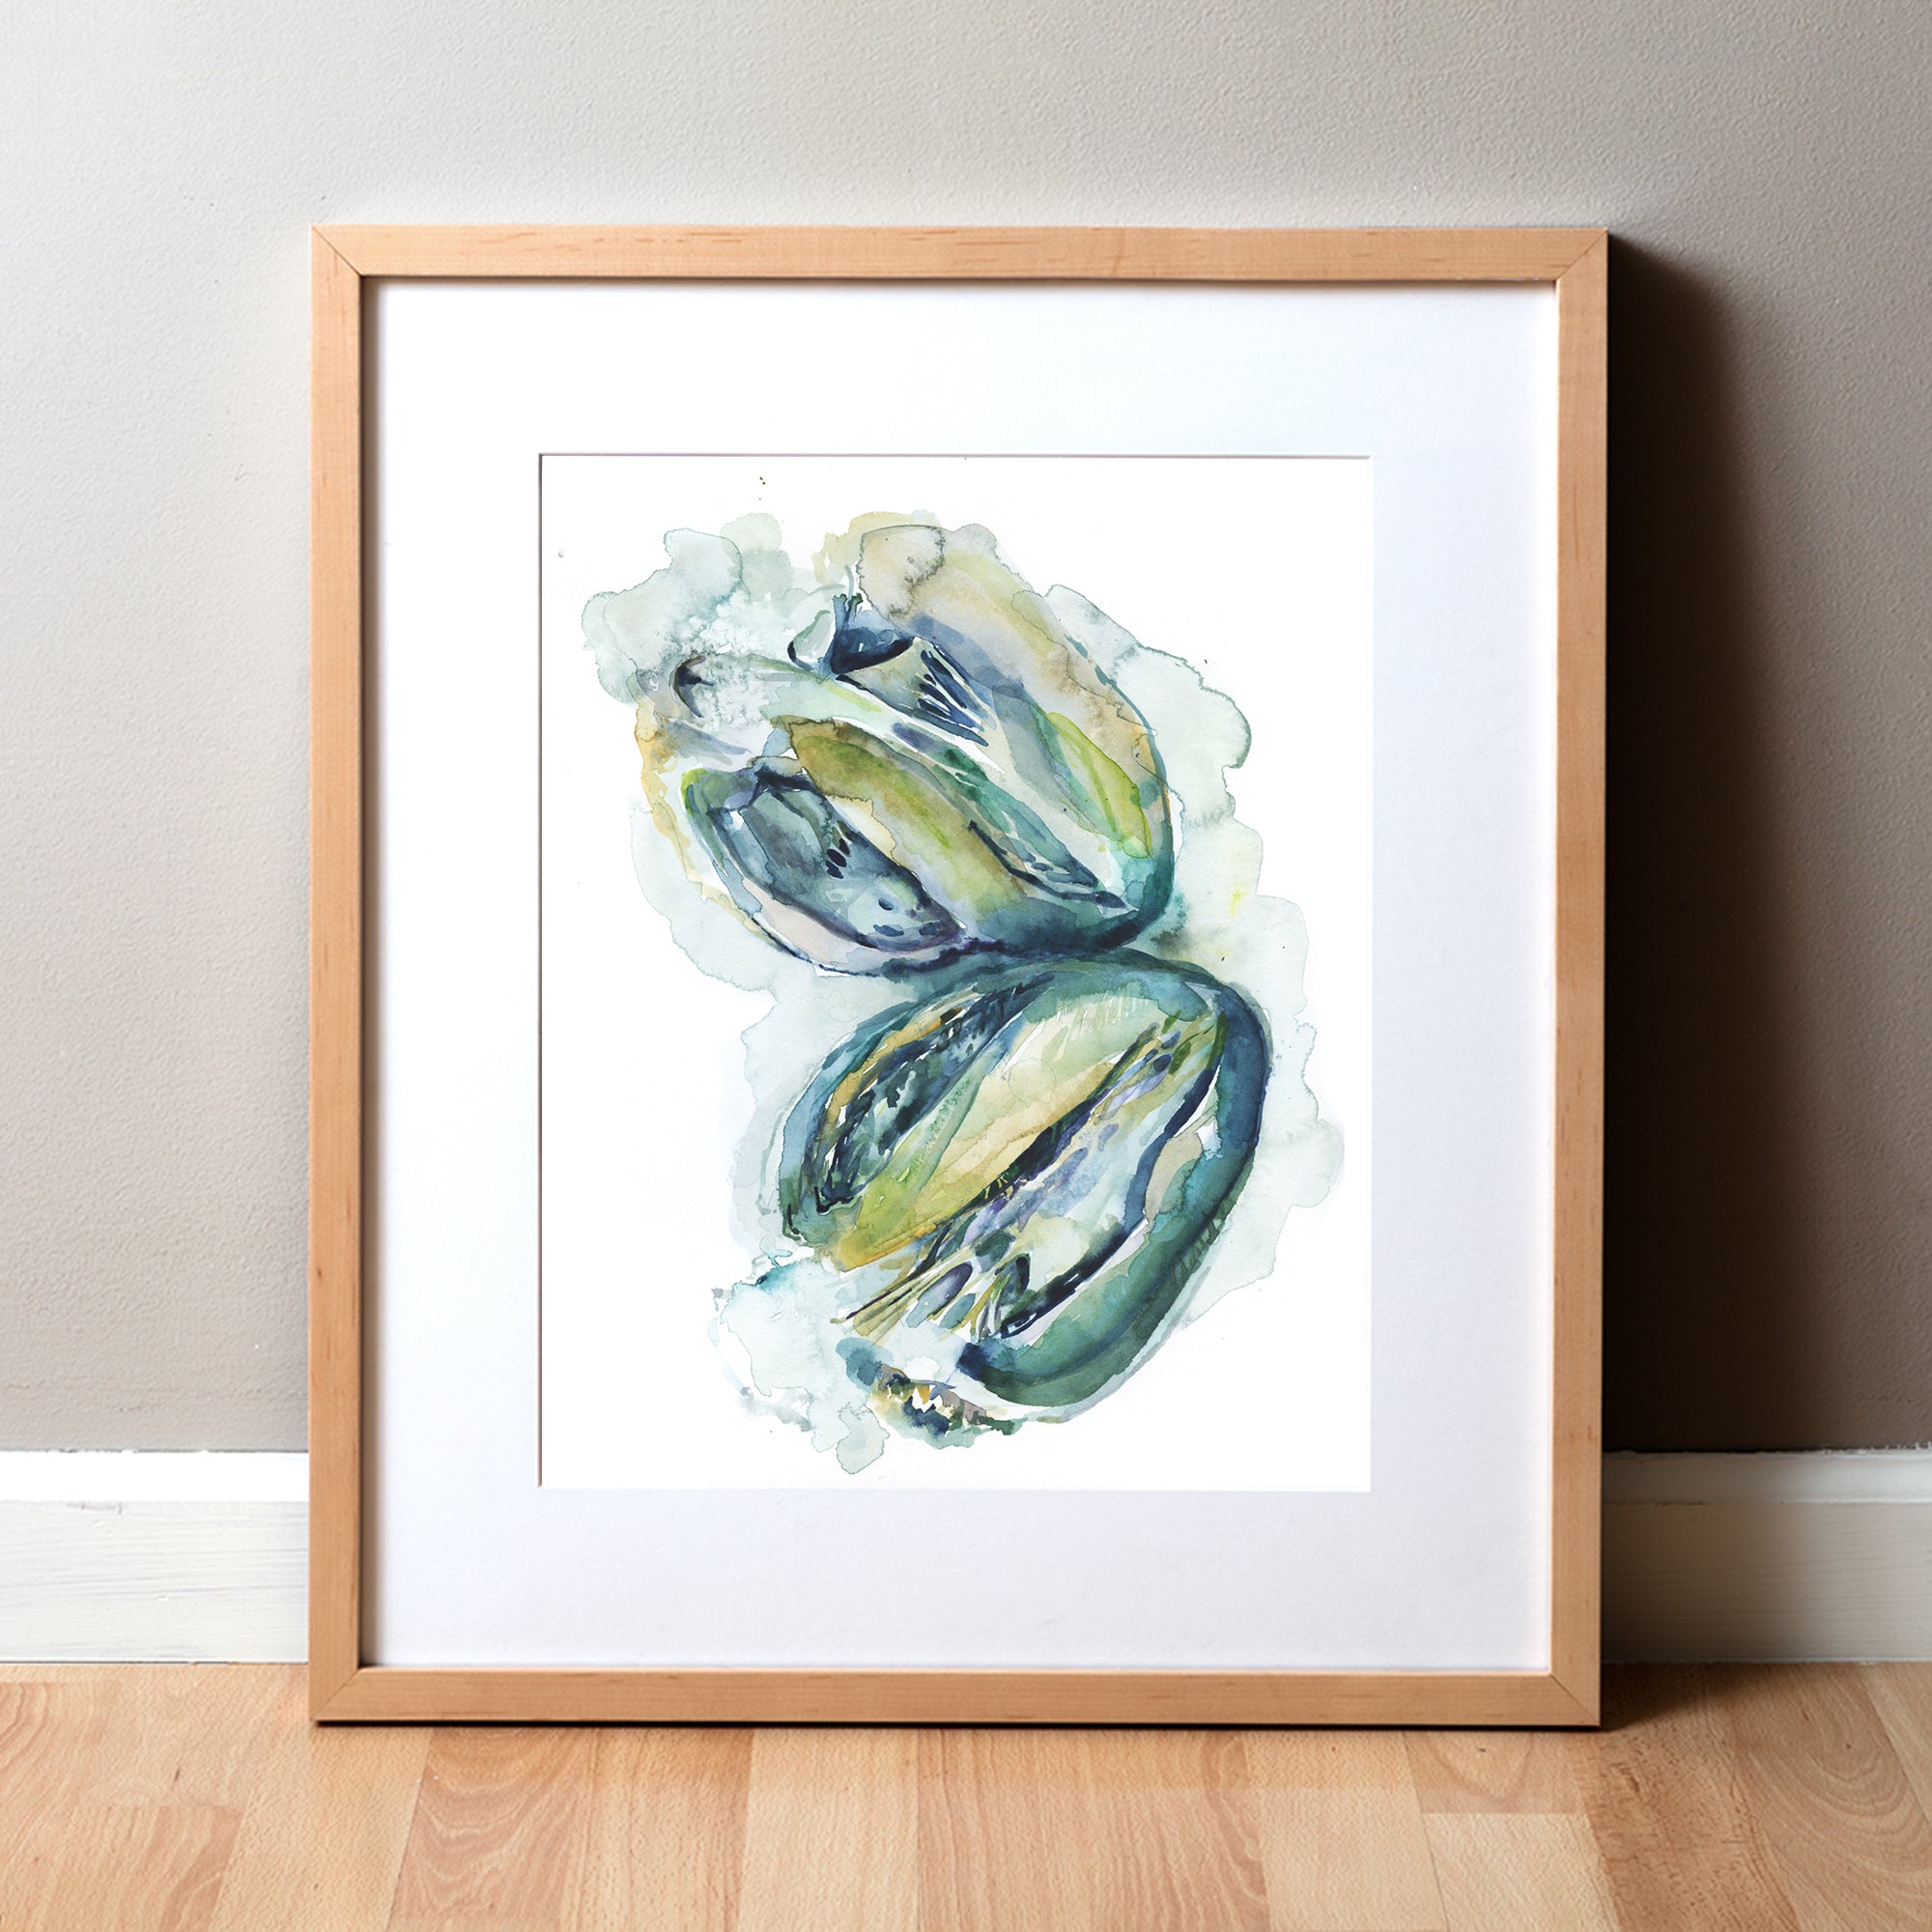 Framed watercolor painting of a heart dissection in greens blues and yellows.